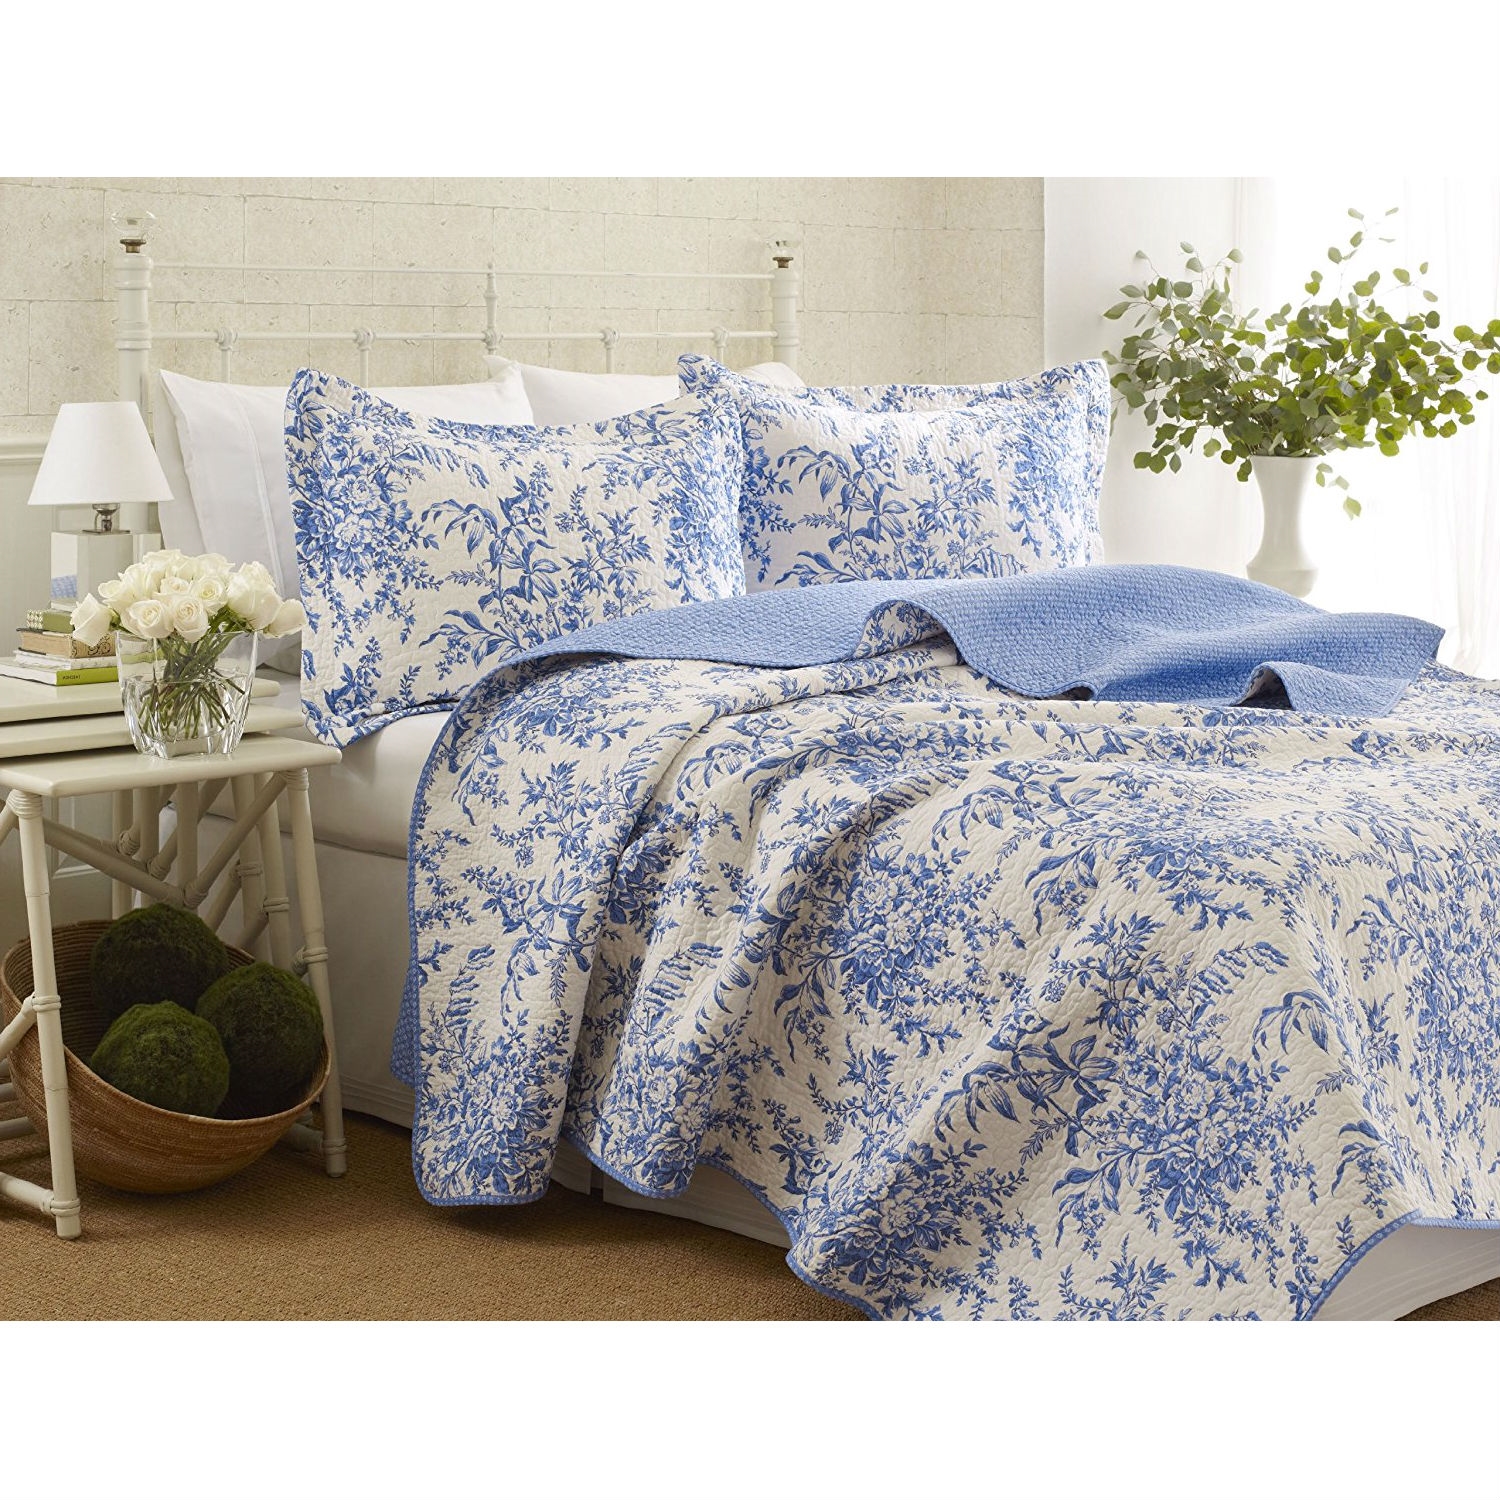 King size 100-Percent Cotton Quilt Bedspread Set with Blue White Floral  Leaves Pattern | FastFurnishings.com